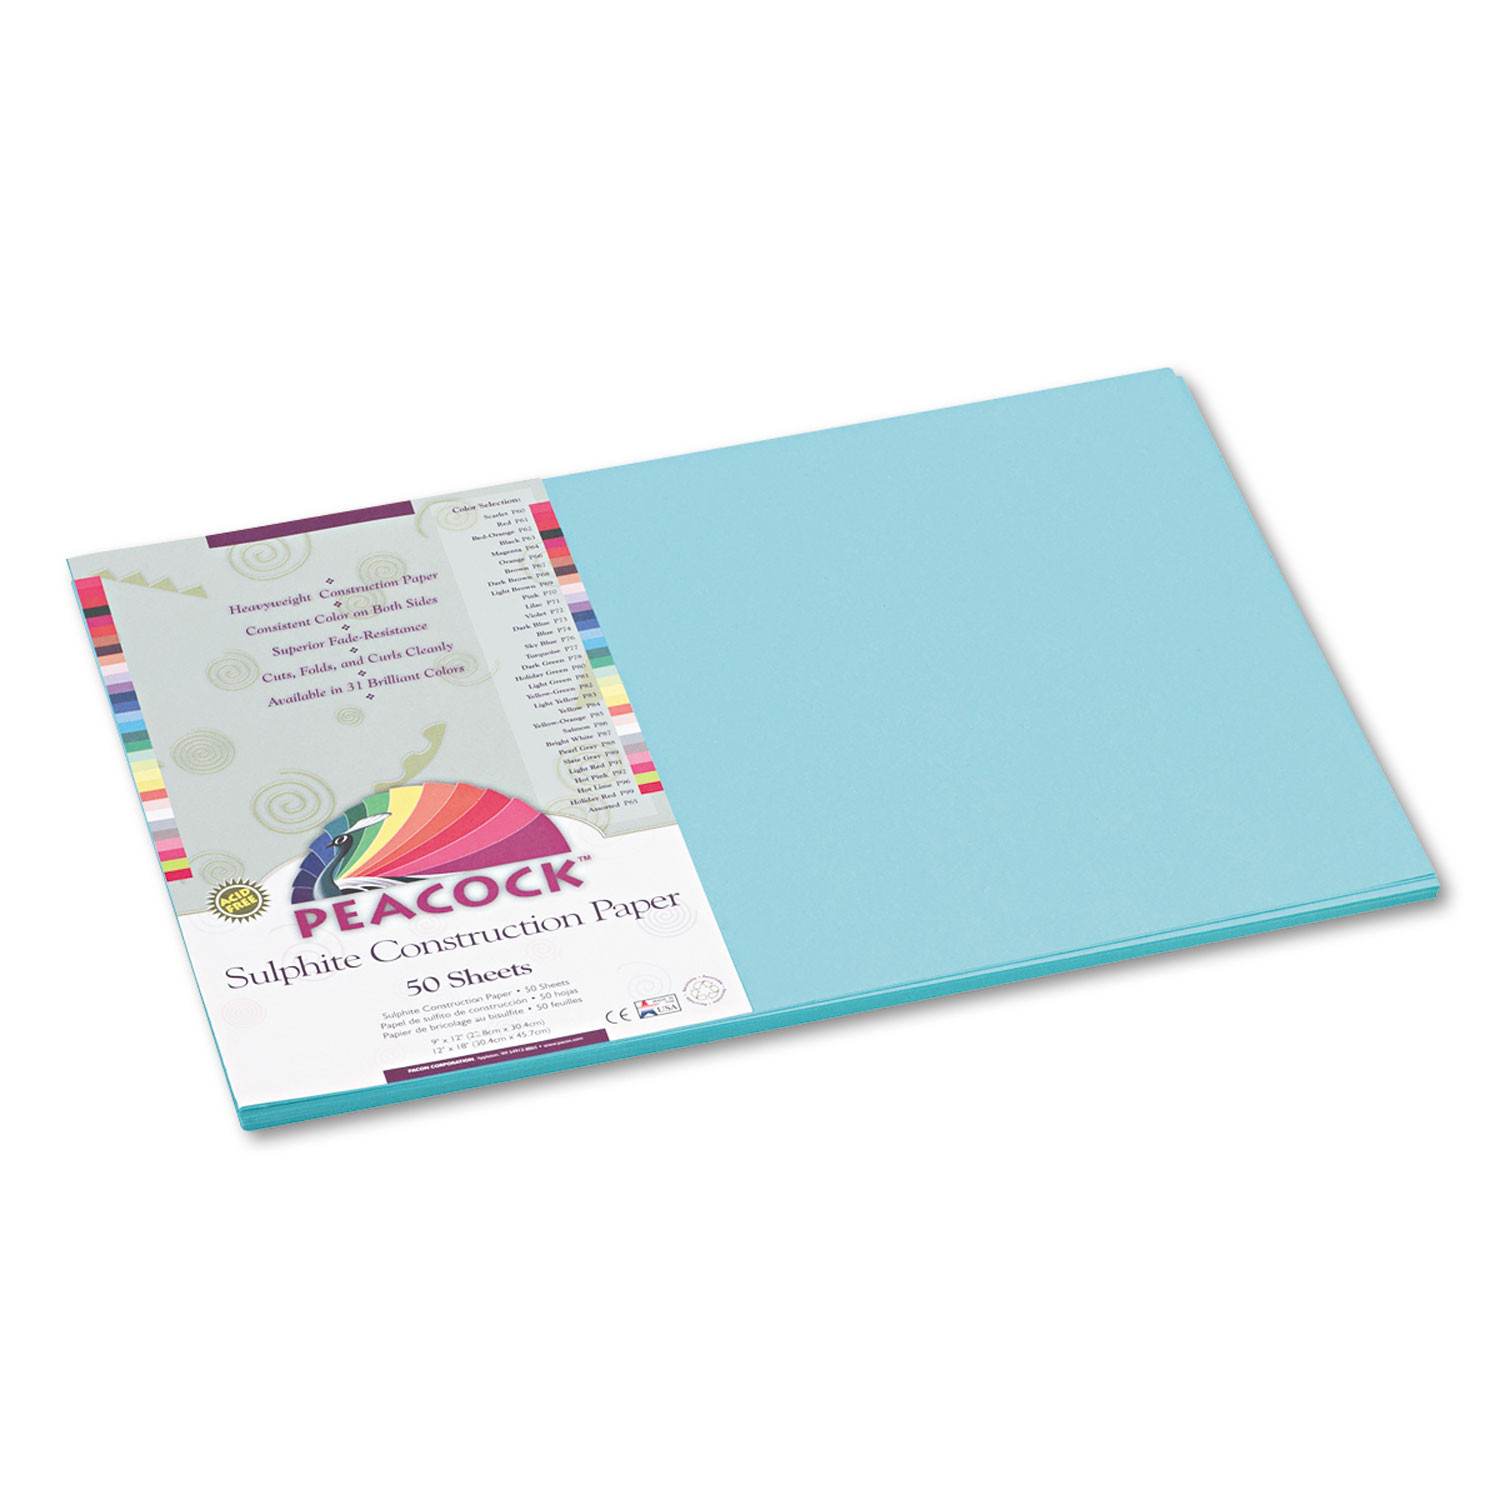 Peacock Sulphite Construction Paper, 76 lbs., 12 x 18, Turquoise, 50 Sheets/Pack